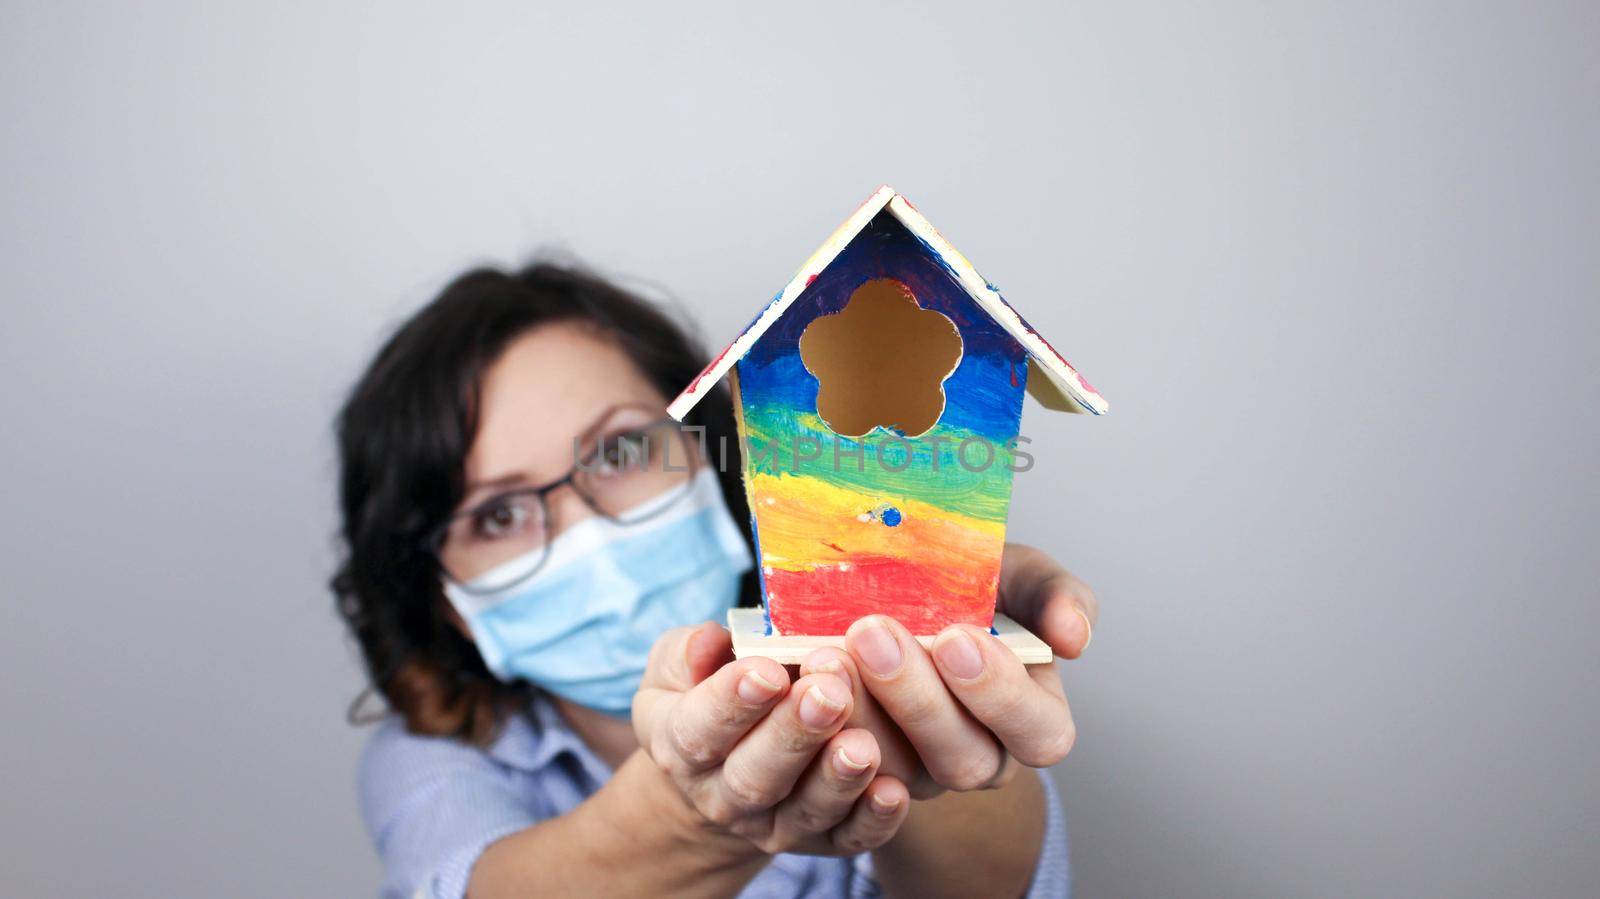 Woman wearing protection face mask against coronavirus and glasses. Woman in a mask showing rainbow house. We will be okay. by JuliaDorian